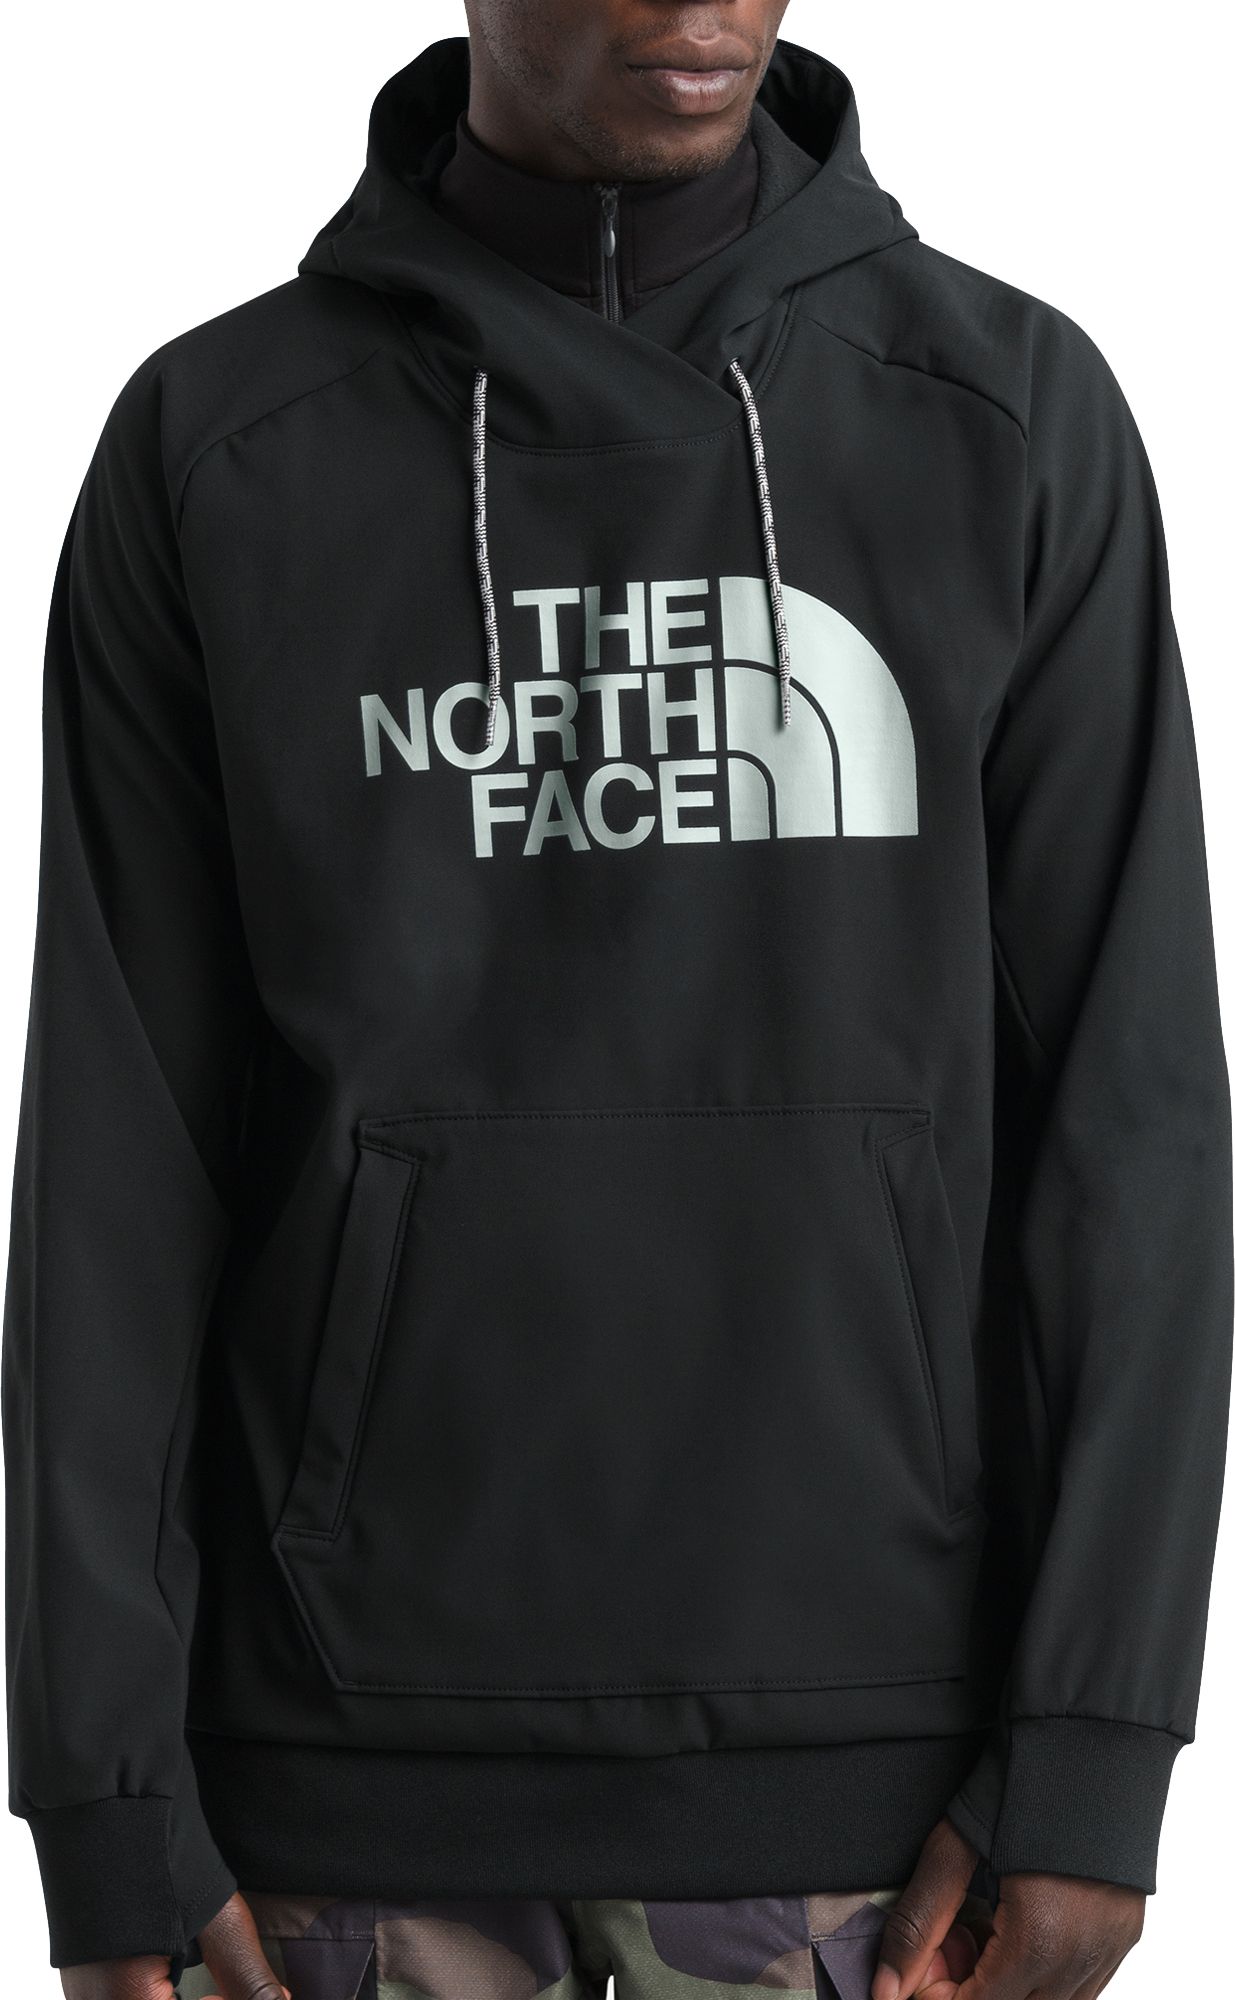 The North Face Men's Tekno Logo Pullover Hoodie - .97